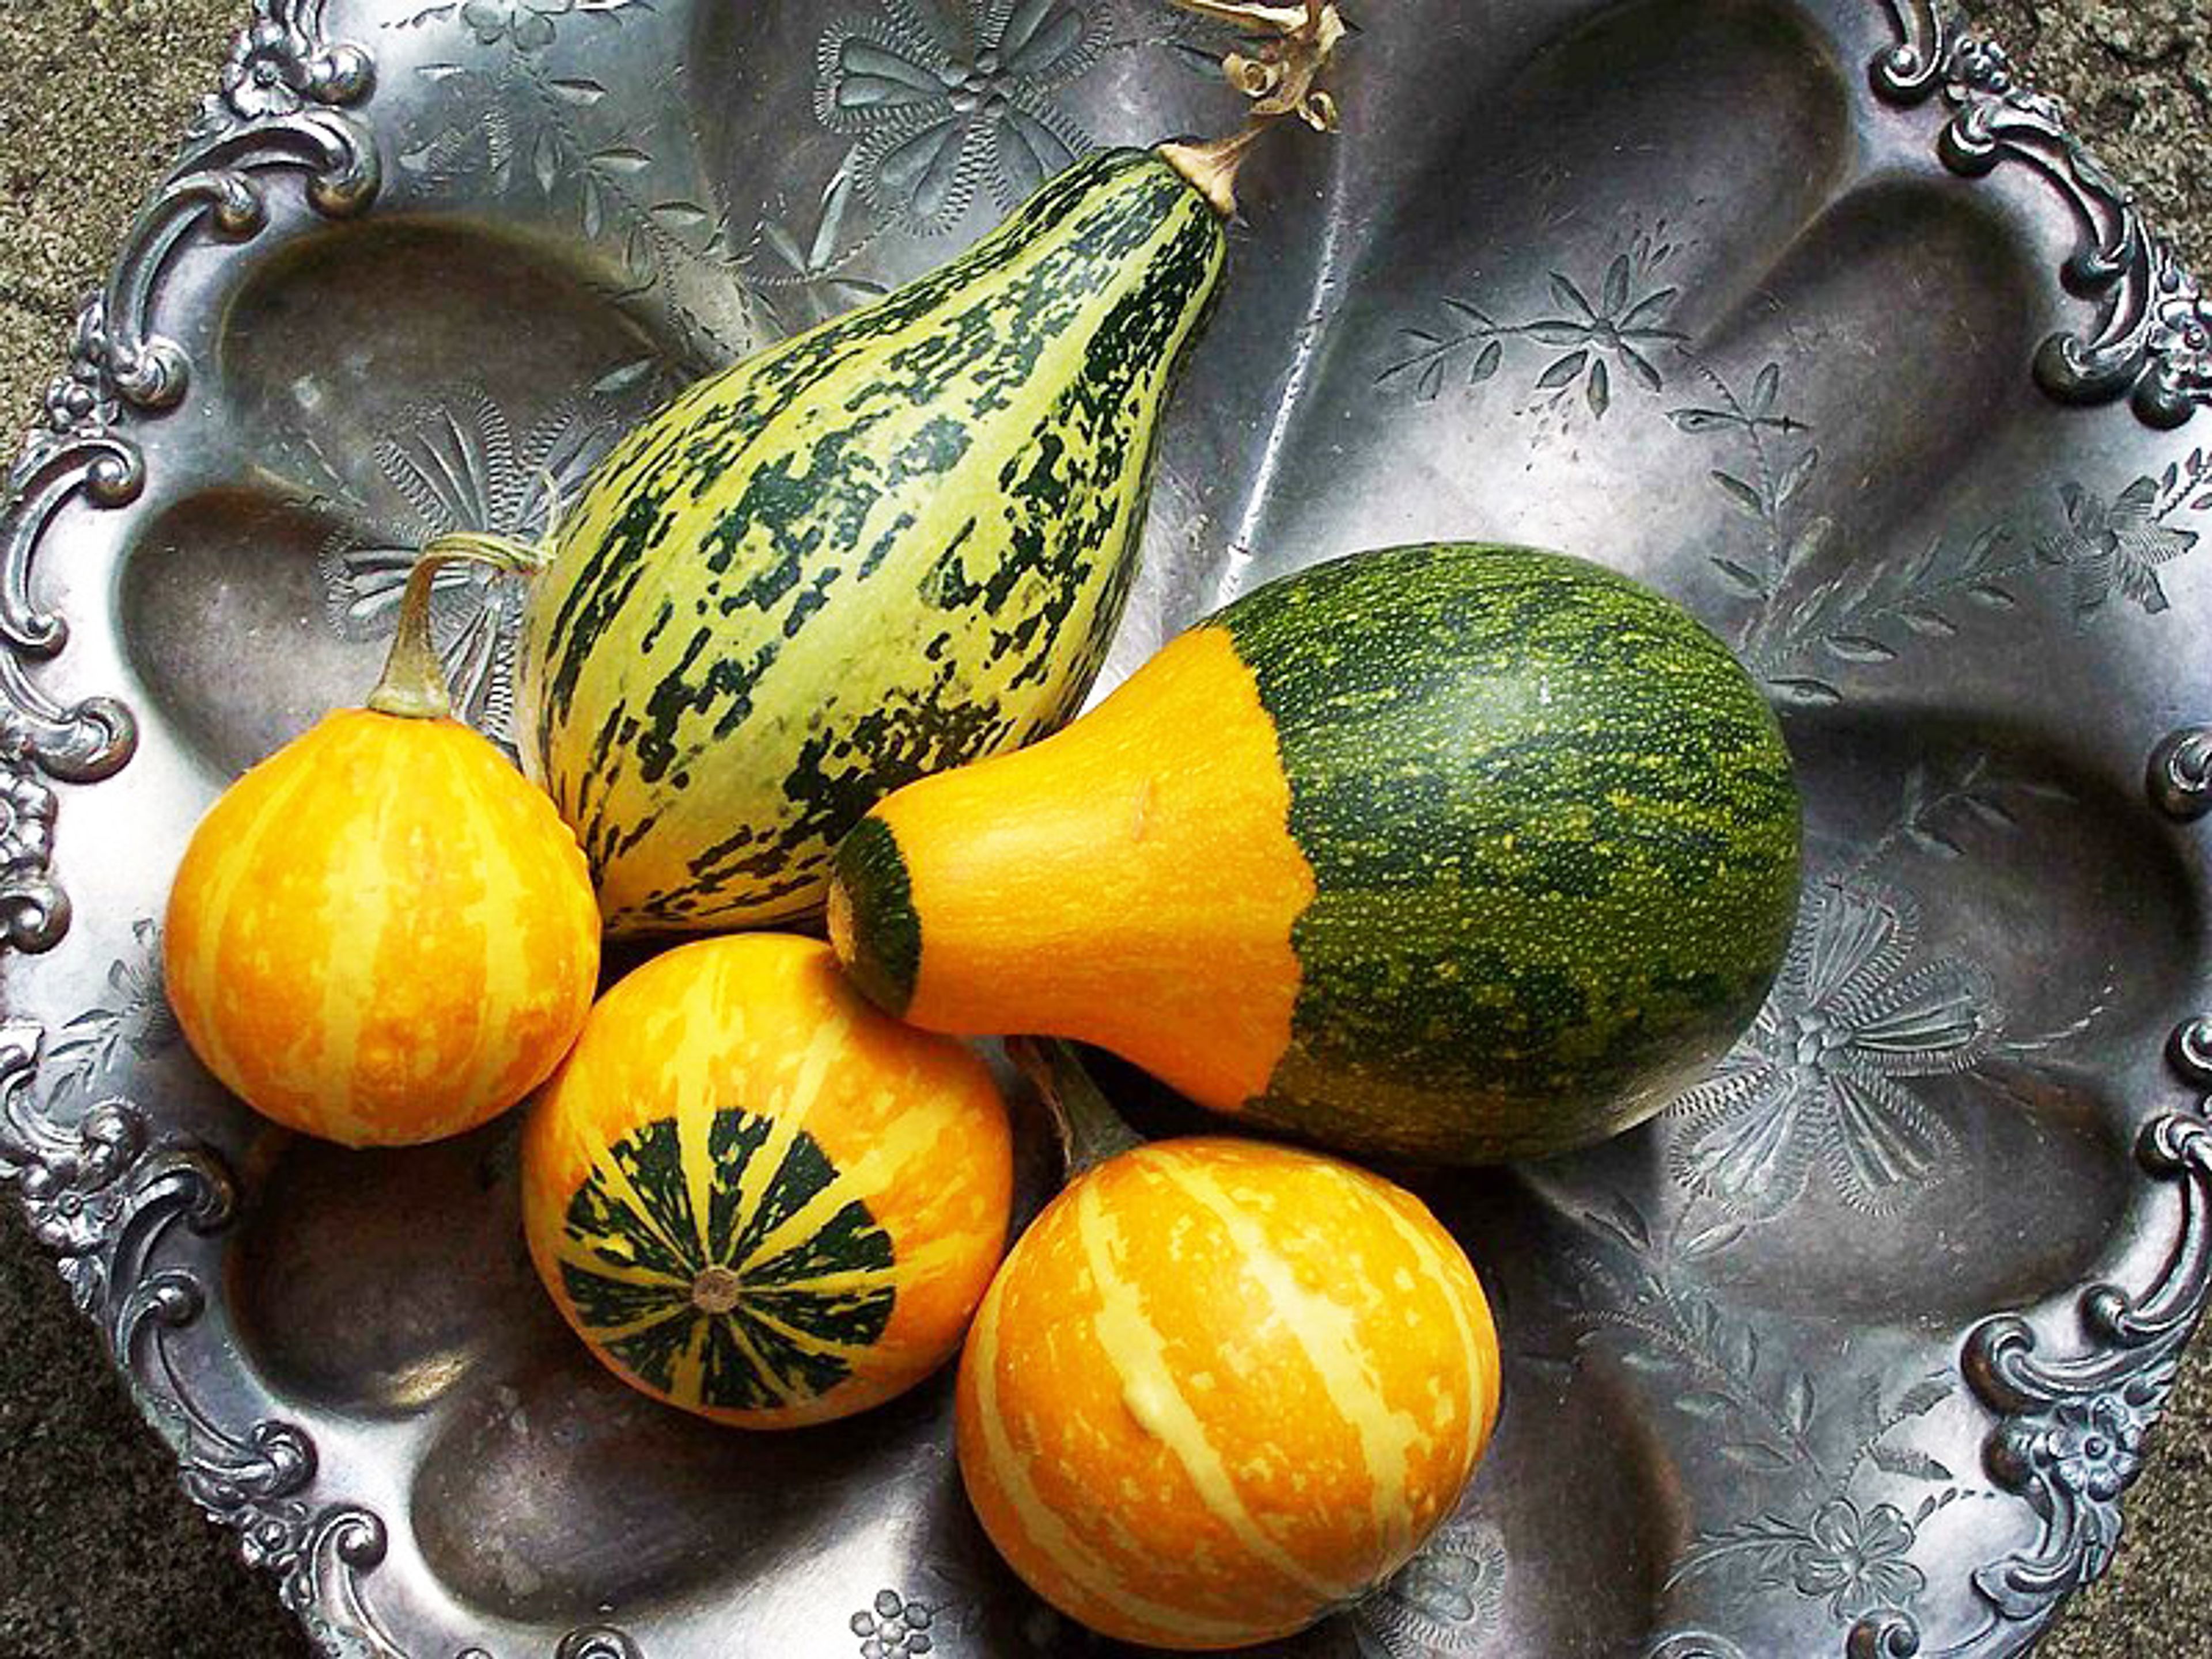 From Ladles to Birdhouses: Discover the Ancient Art of Gourd Crafting